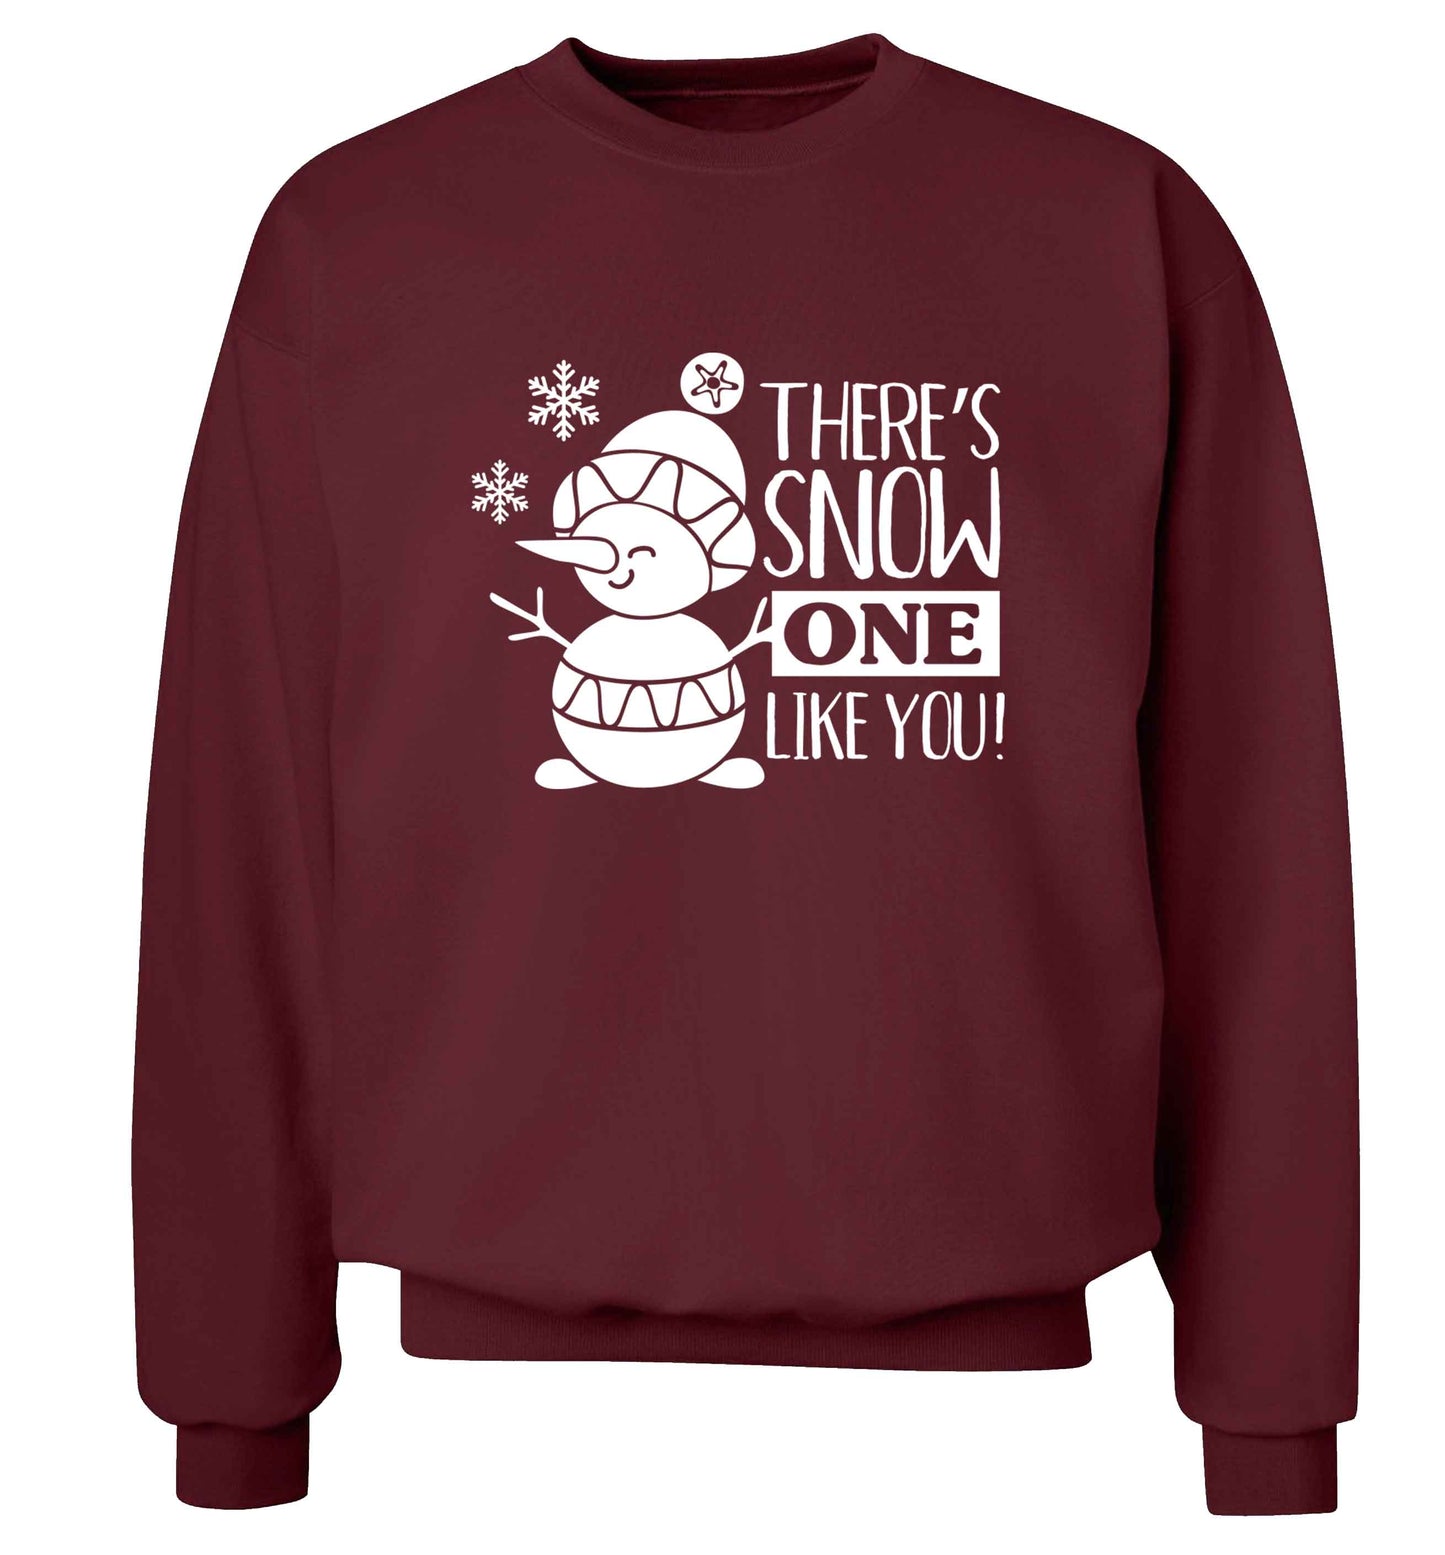 There's snow one like you adult's unisex maroon sweater 2XL